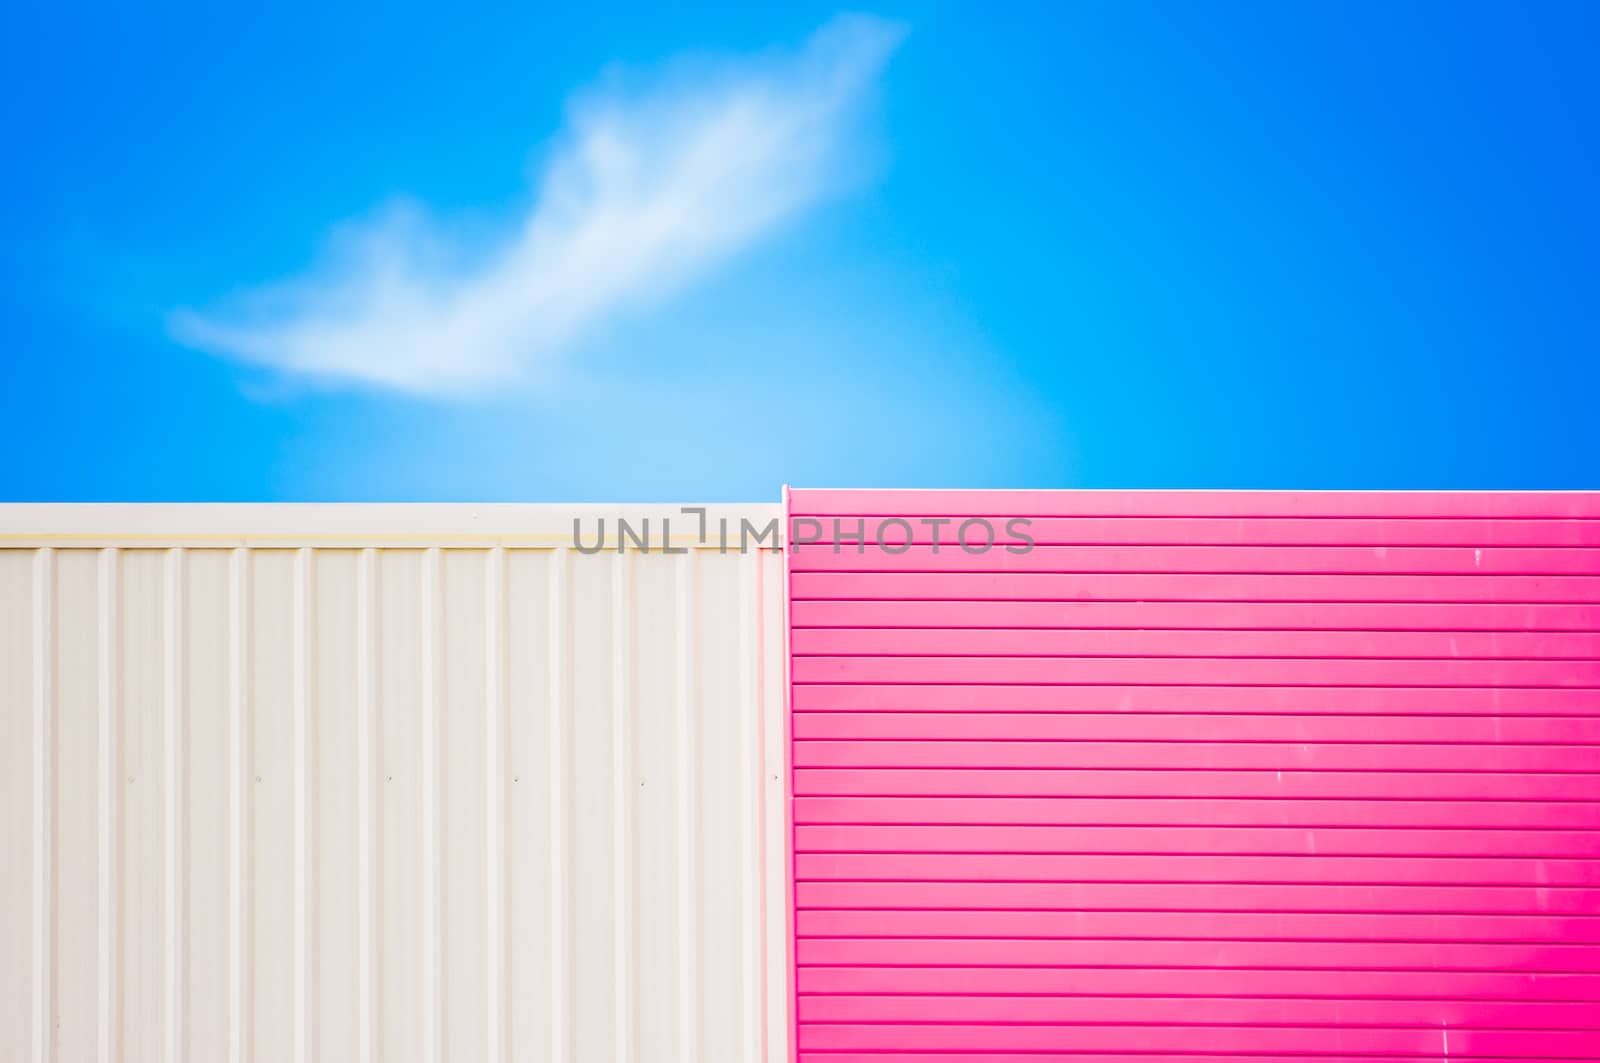 Colorful wall and blue sky.